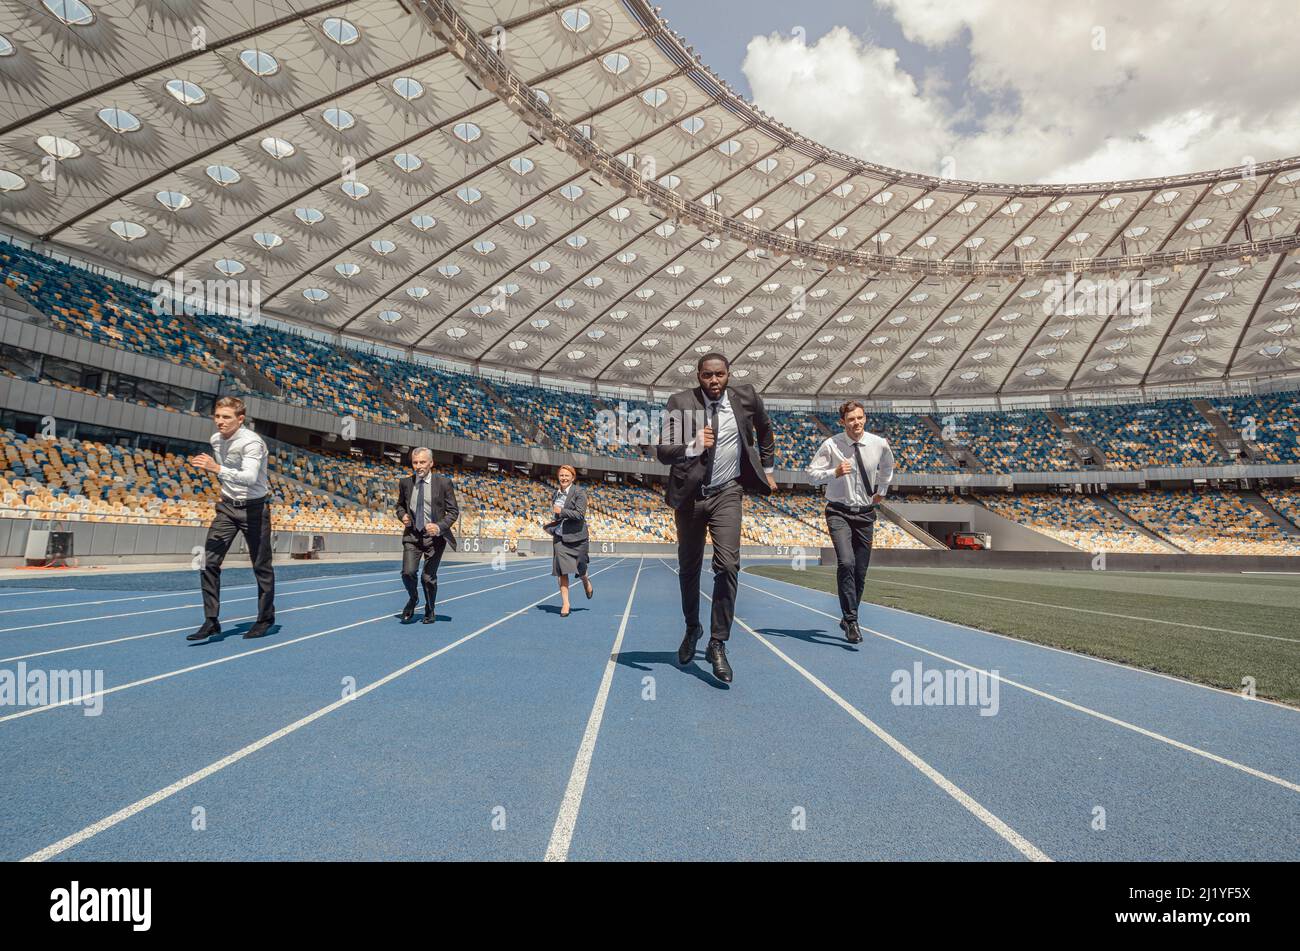 People in business suits running on modern sports track Stock Photo